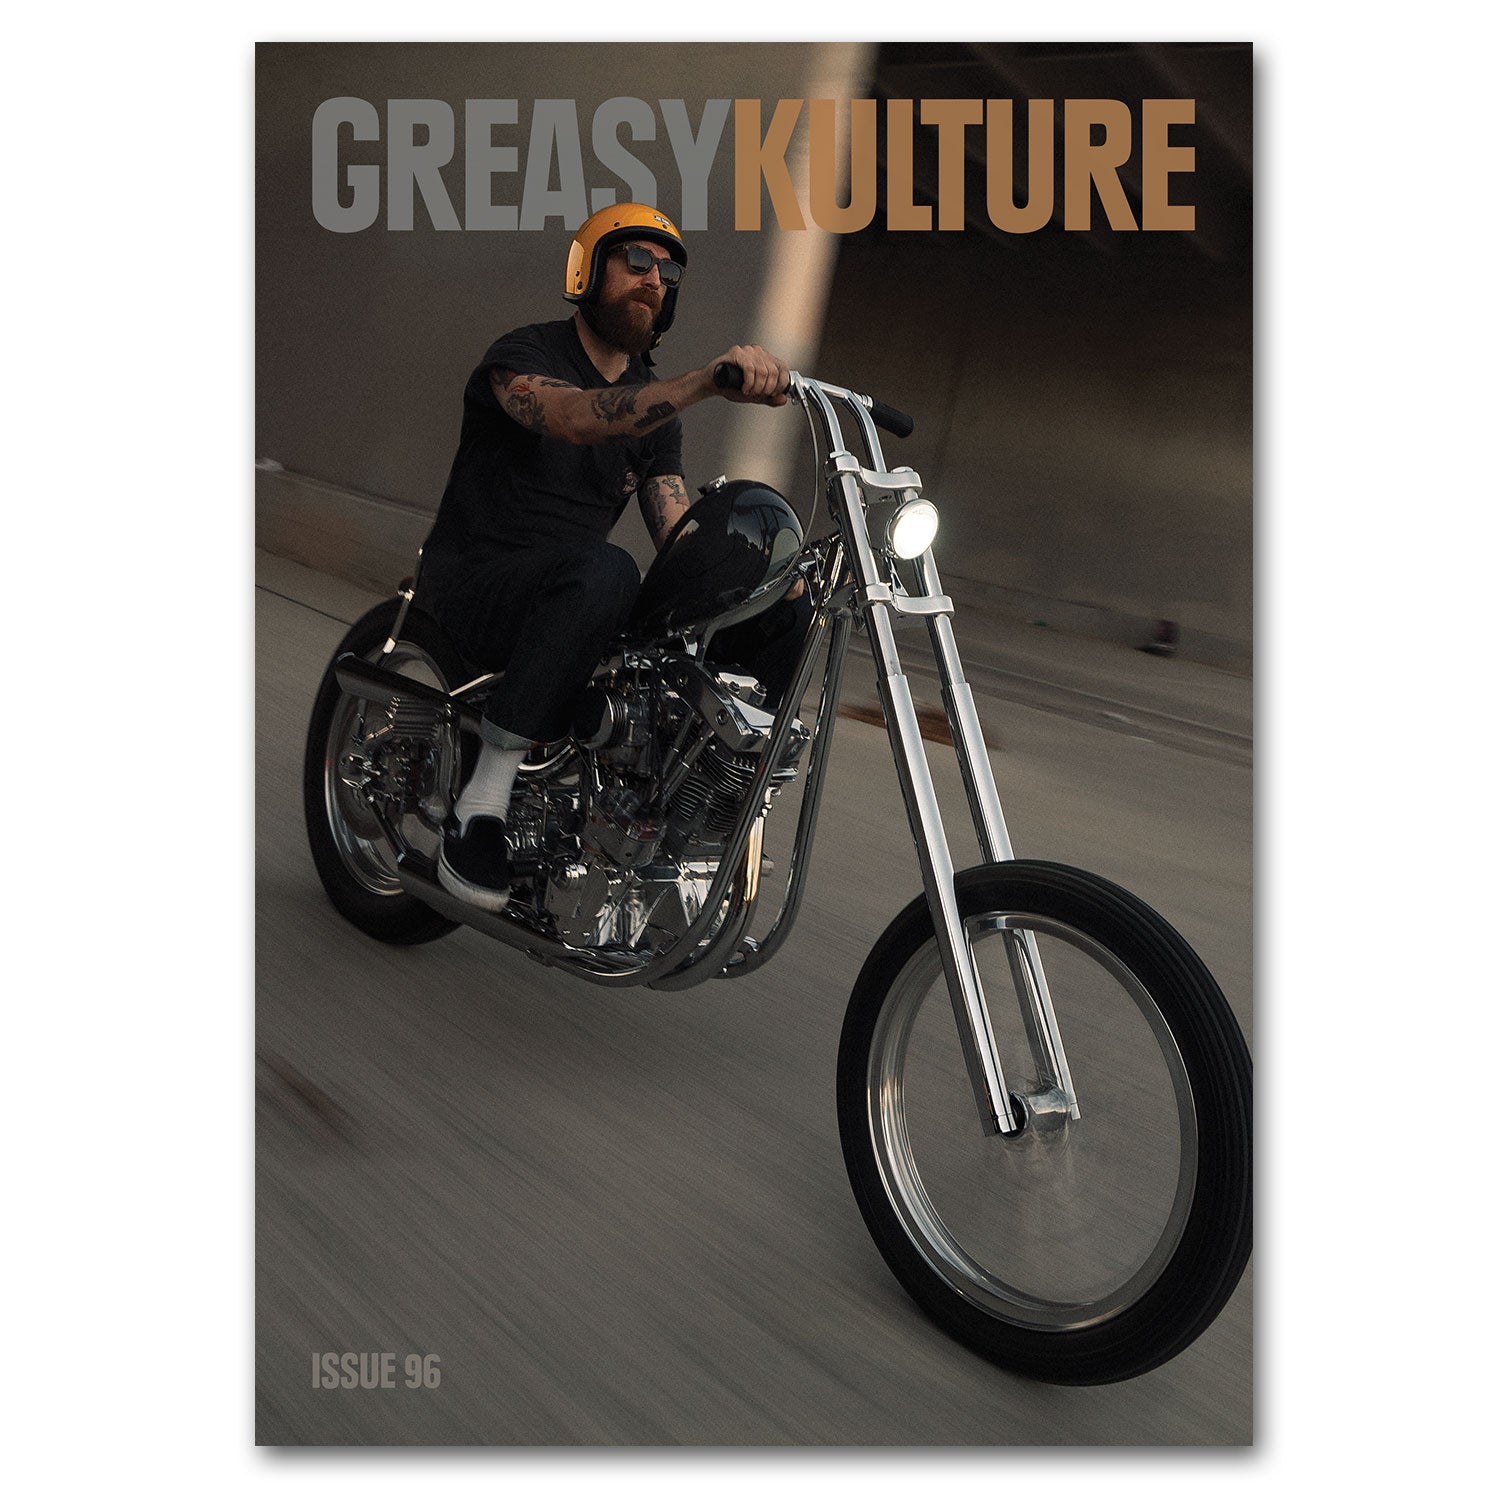 Greasy Kulture issue 96